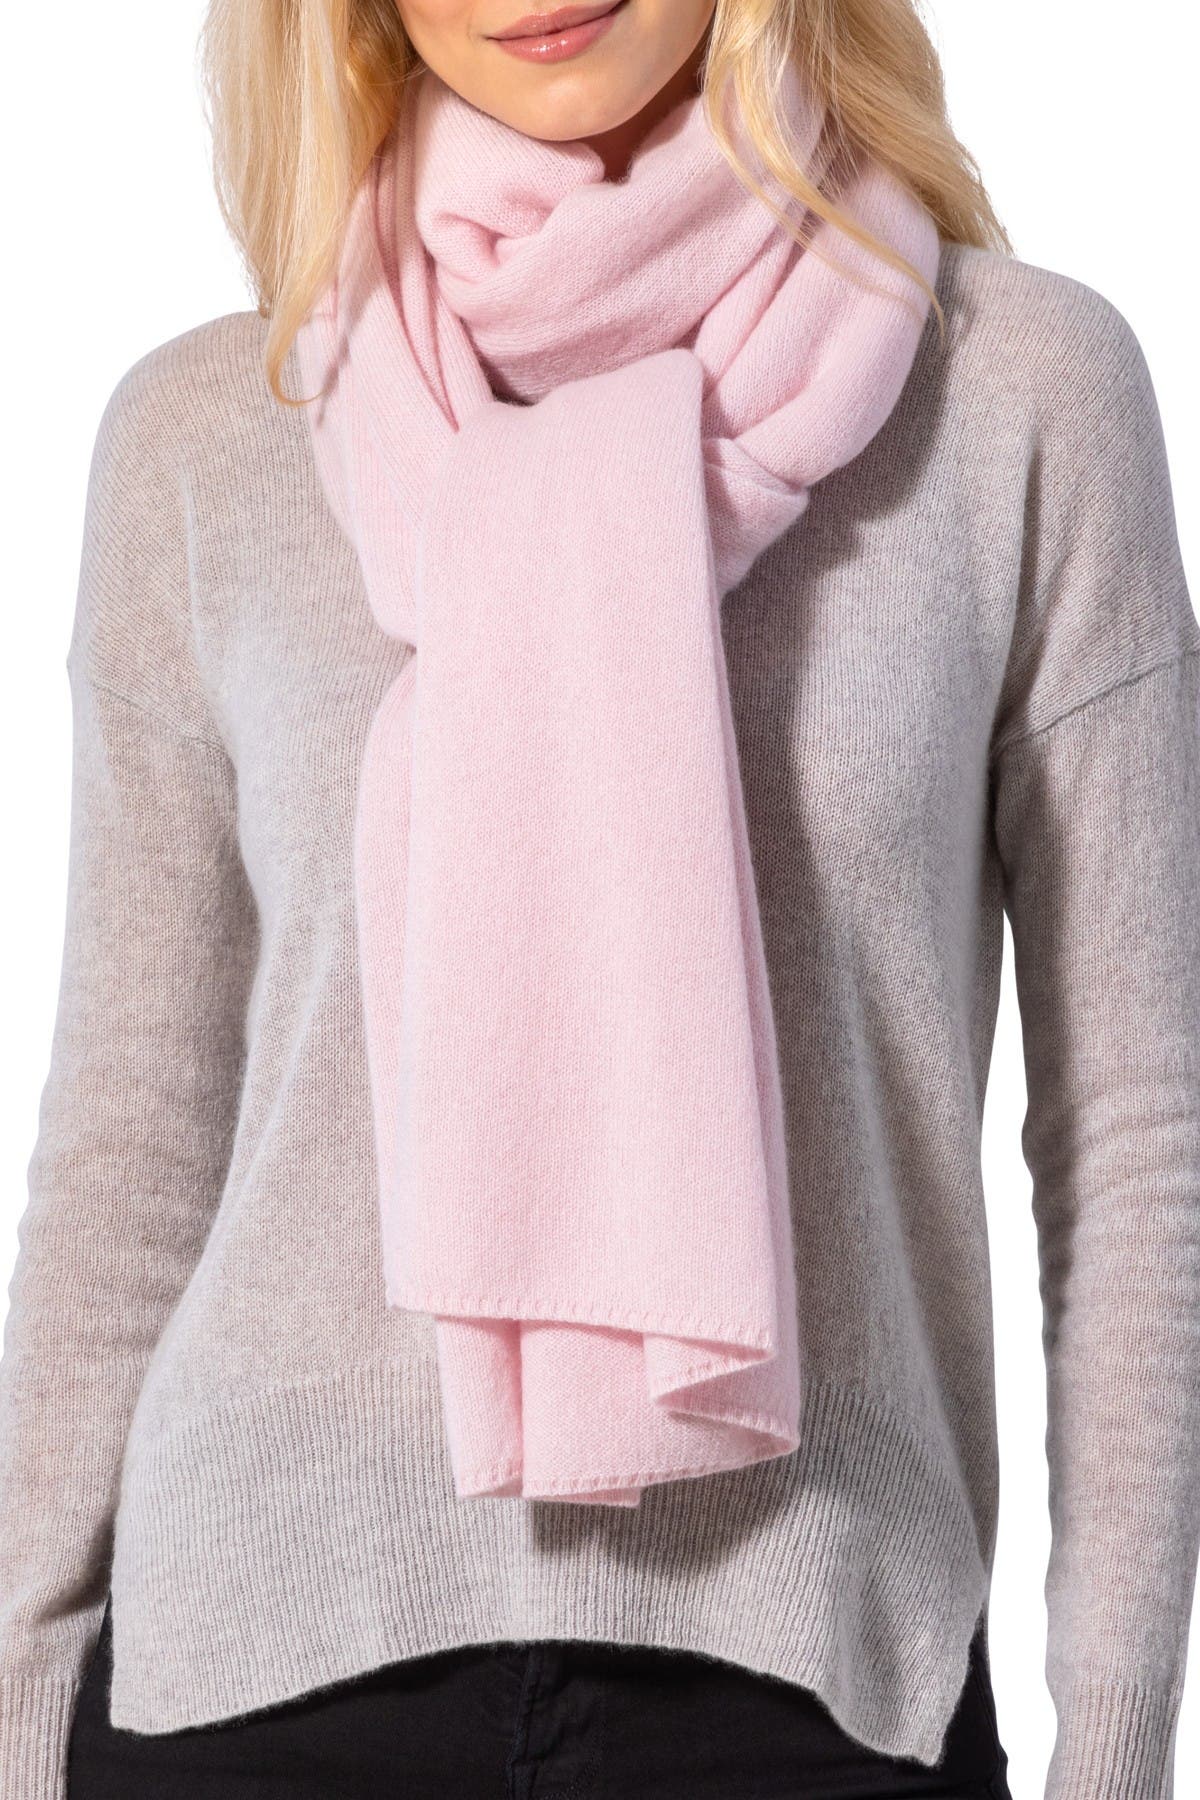 cashmere travel wrap scarf amicale